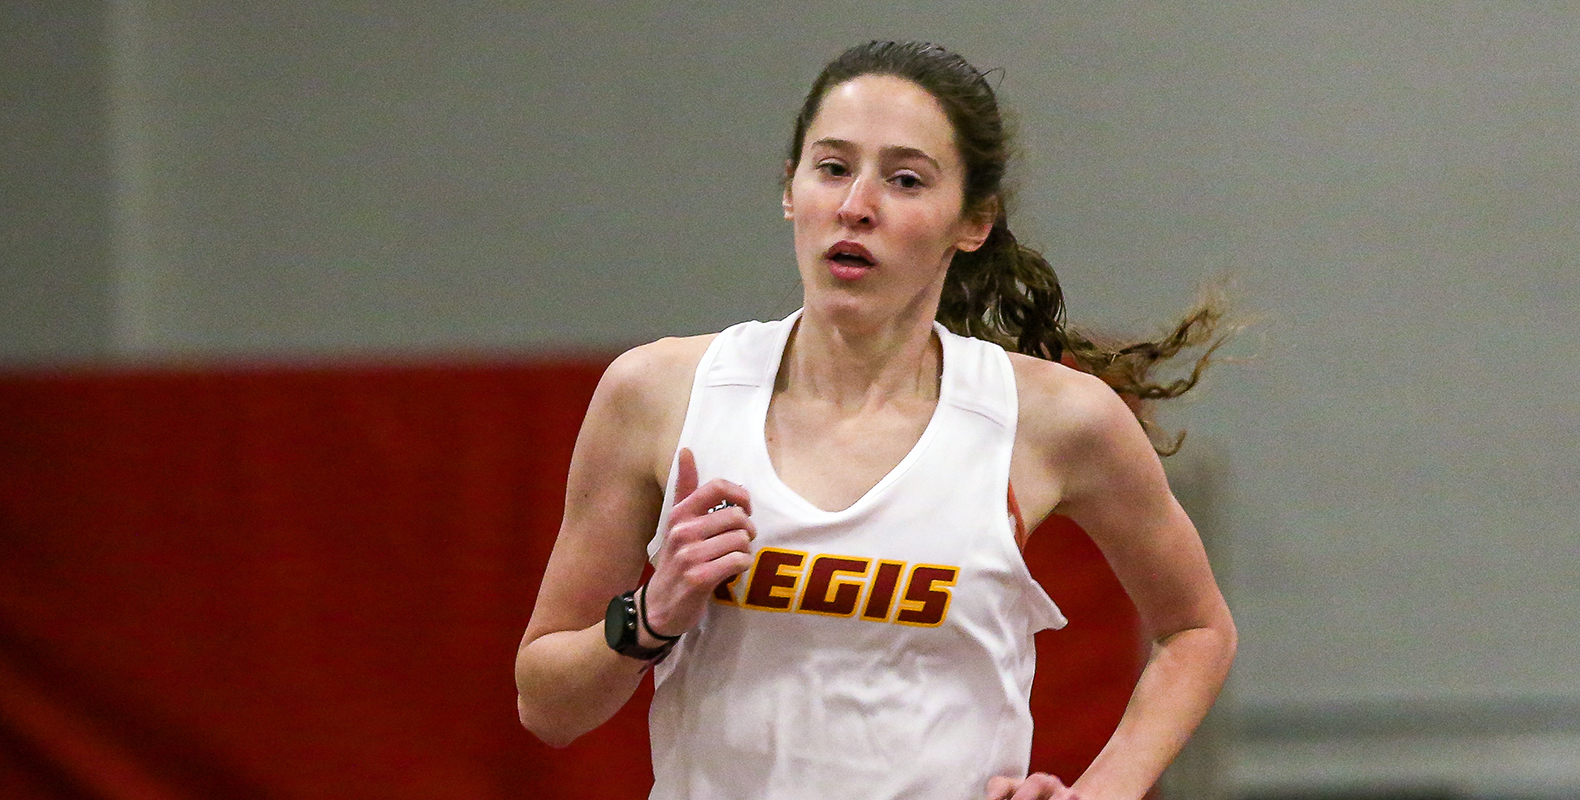 School Records Highlight Saturday Competition for Regis Women’s Track & Field